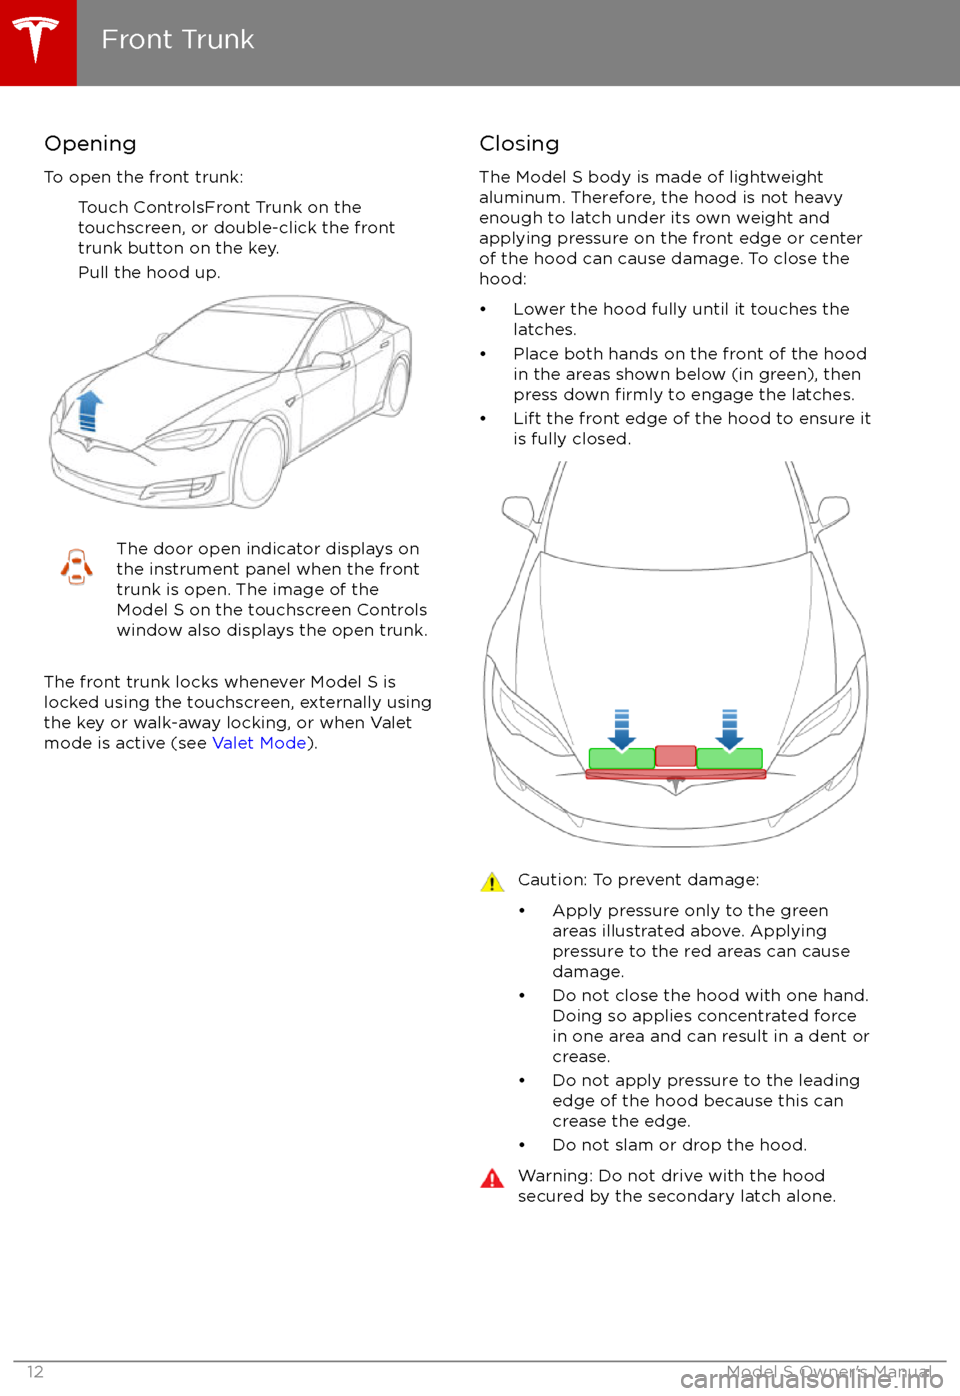 TESLA MODEL S 2017 User Guide Opening
To open the front trunk: Touch ControlsFront Trunk on the
touchscreen, or double-click the front
trunk button on the key.
Pull the hood up.The door open indicator displays on
the instrument pa